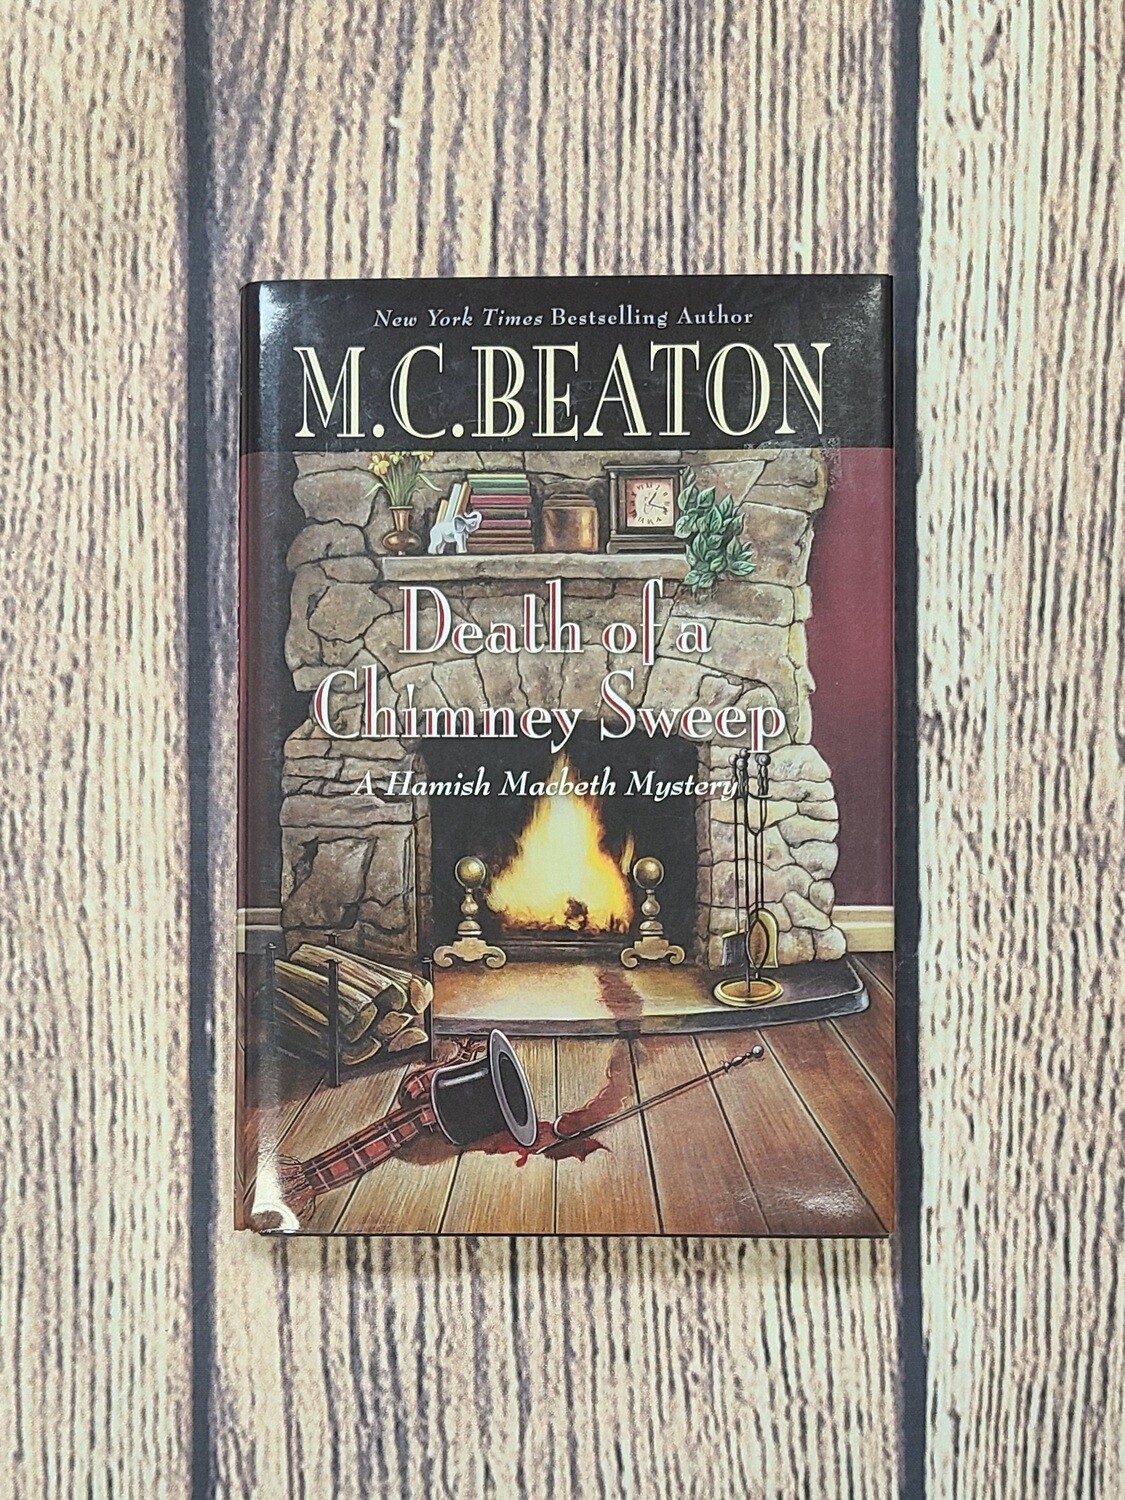 Death of a Chimney Sweep by M. C. Beaton